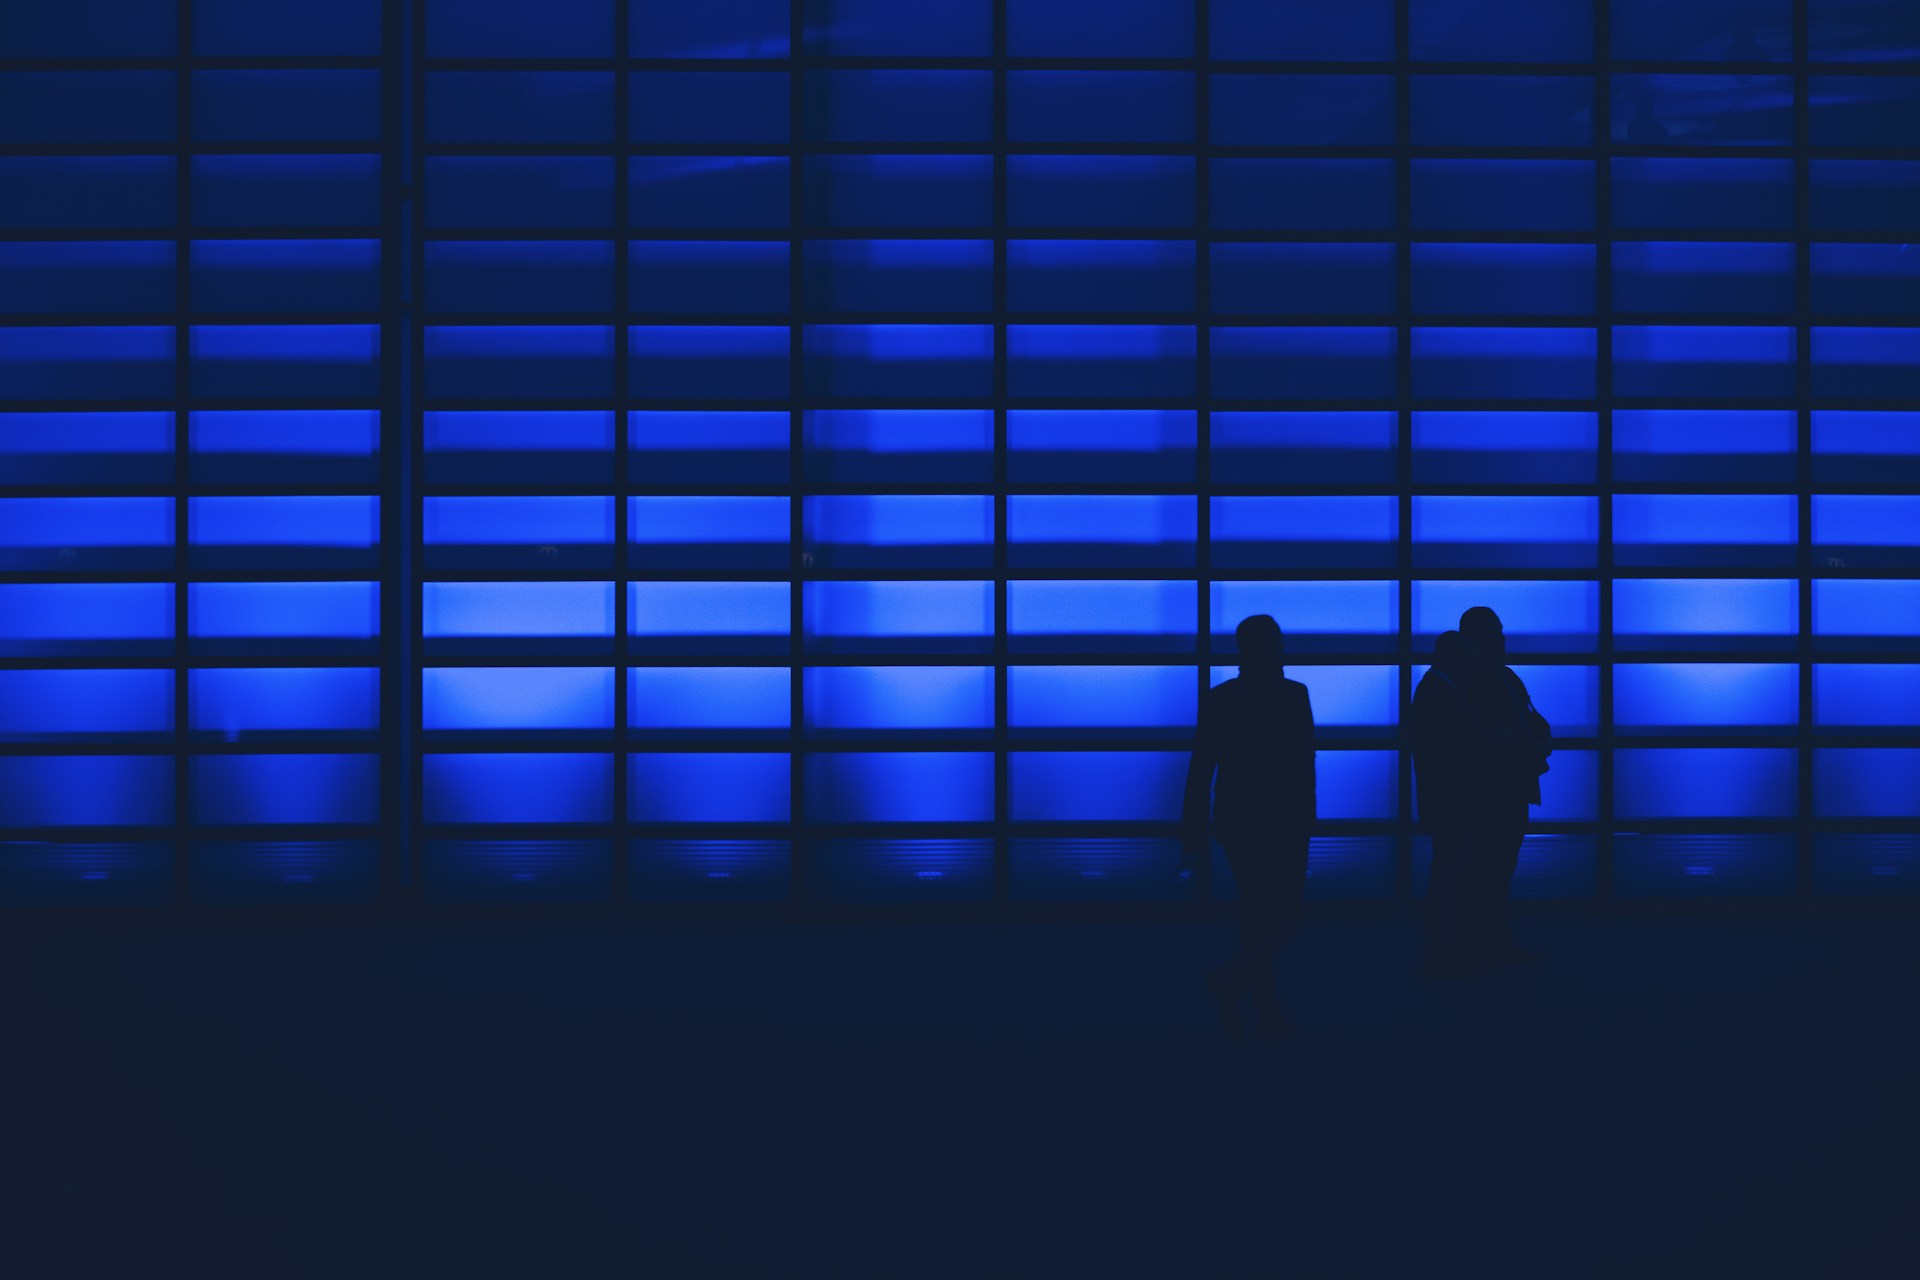 silhouette photo of two person standing near wall